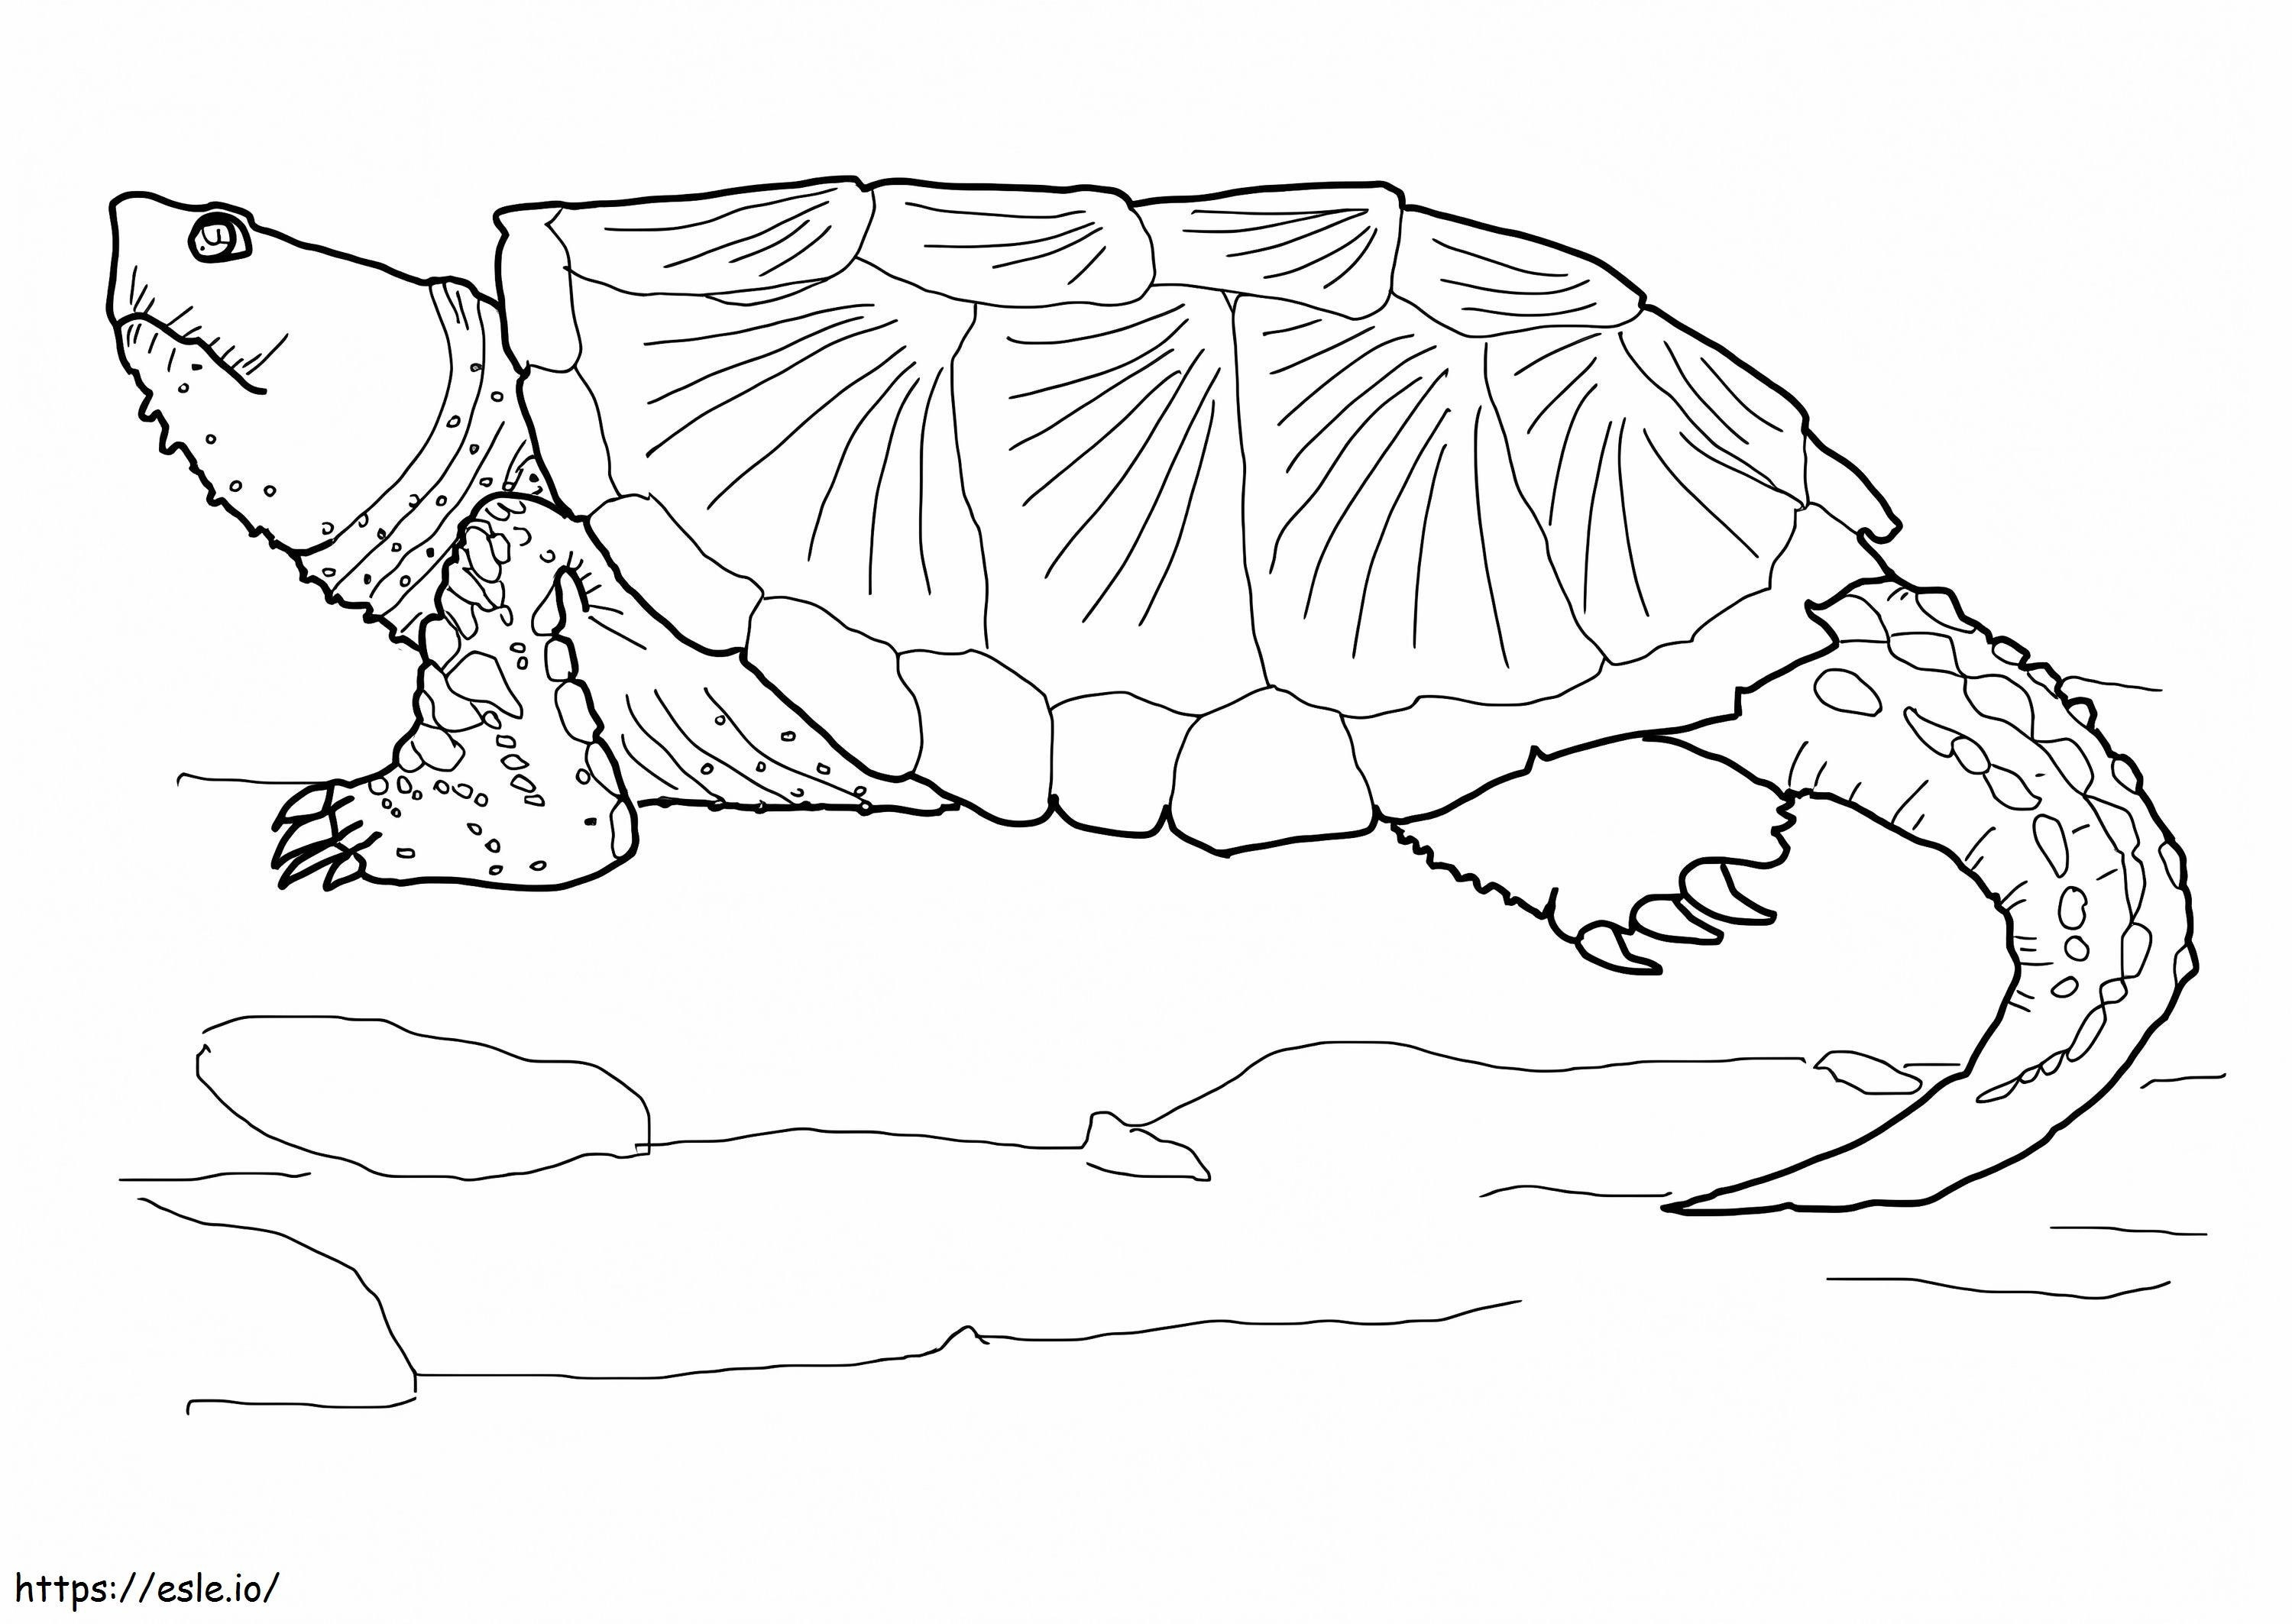 Common Snapping Turtle 1 coloring page